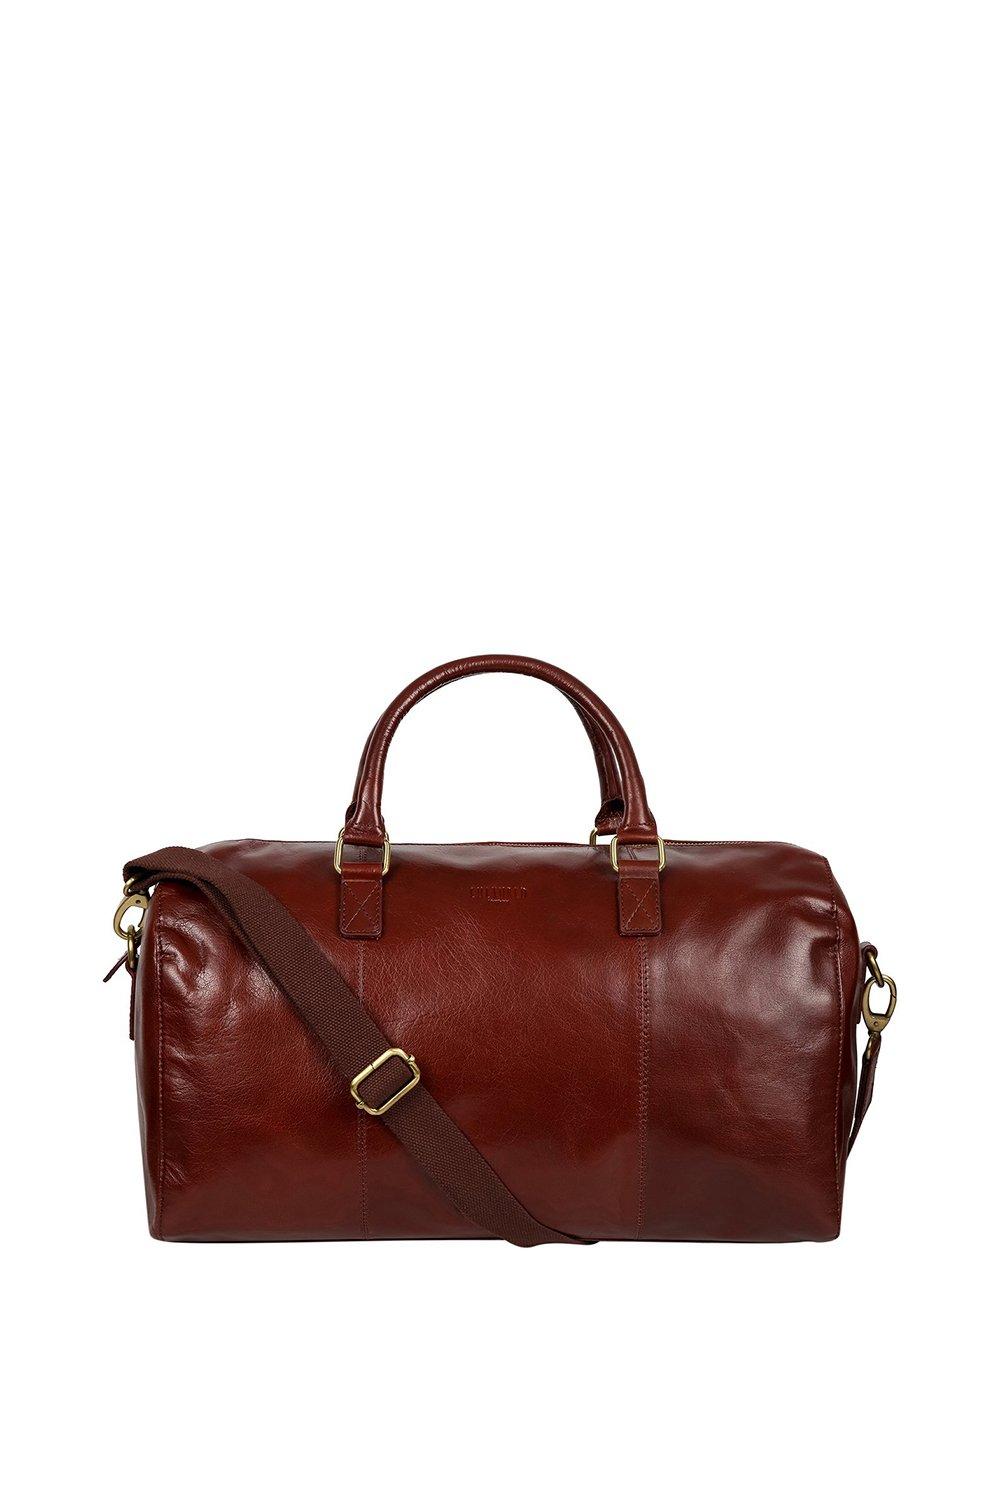 Bags & Wallets | 'Weekender' Leather Holdall | Cultured London